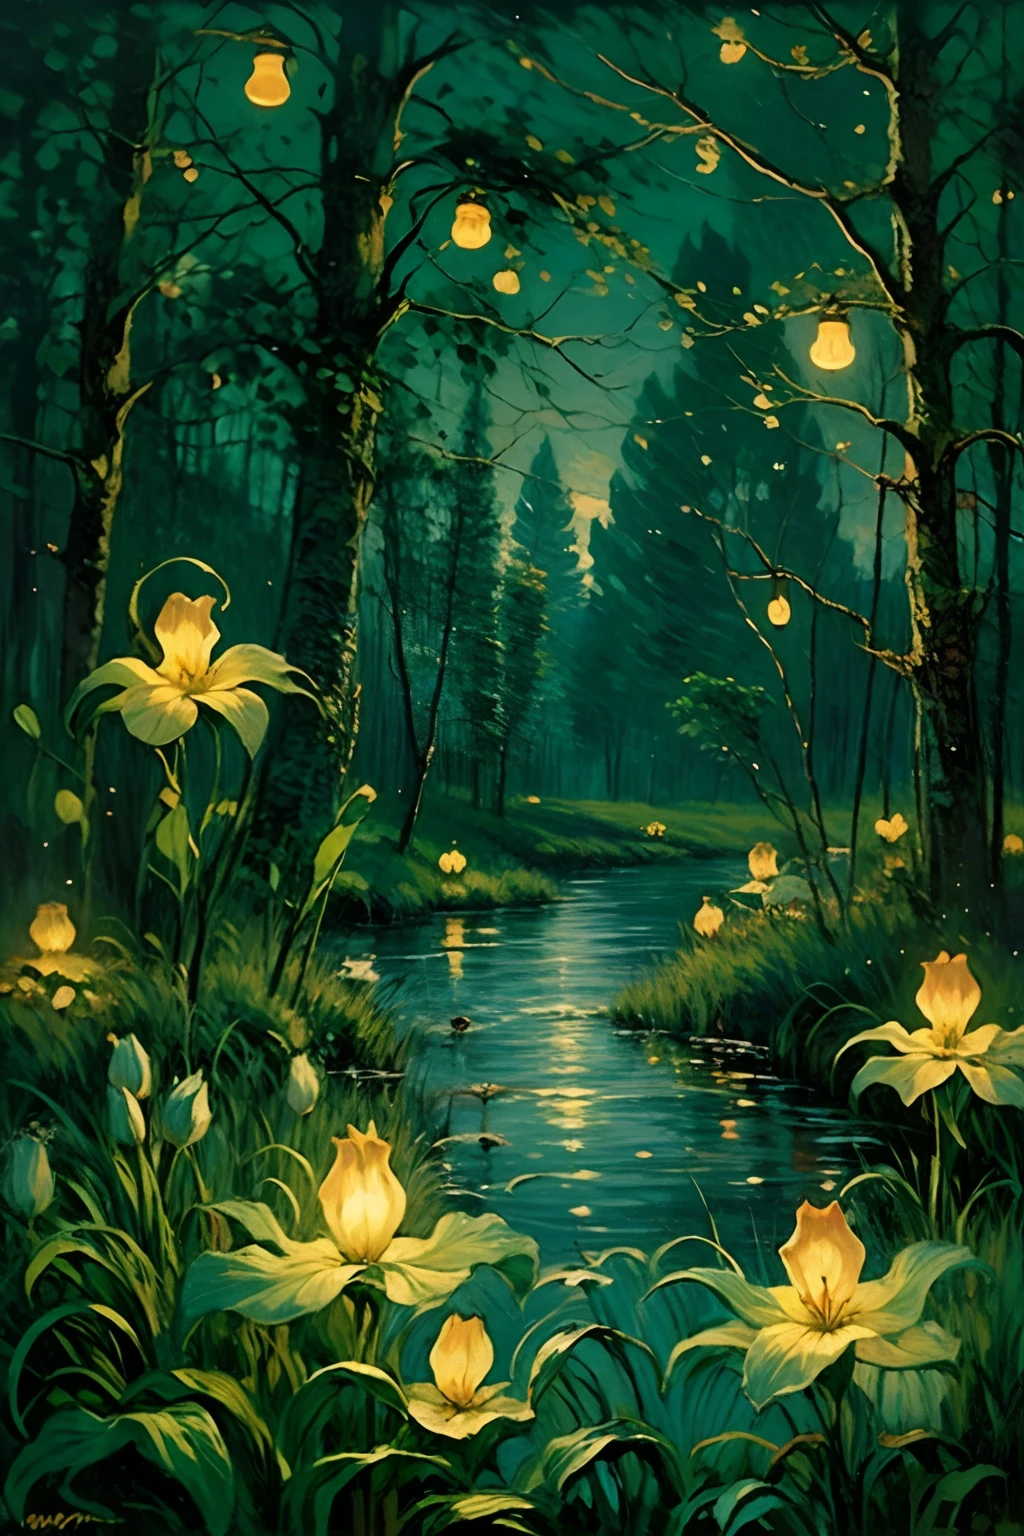 oil painting landscape, cinematic lighting, contrast lighting, swamp at night, fireflies, ghosts, candles flying in the air, whimsical, magical, old vintage art, swapm lilies